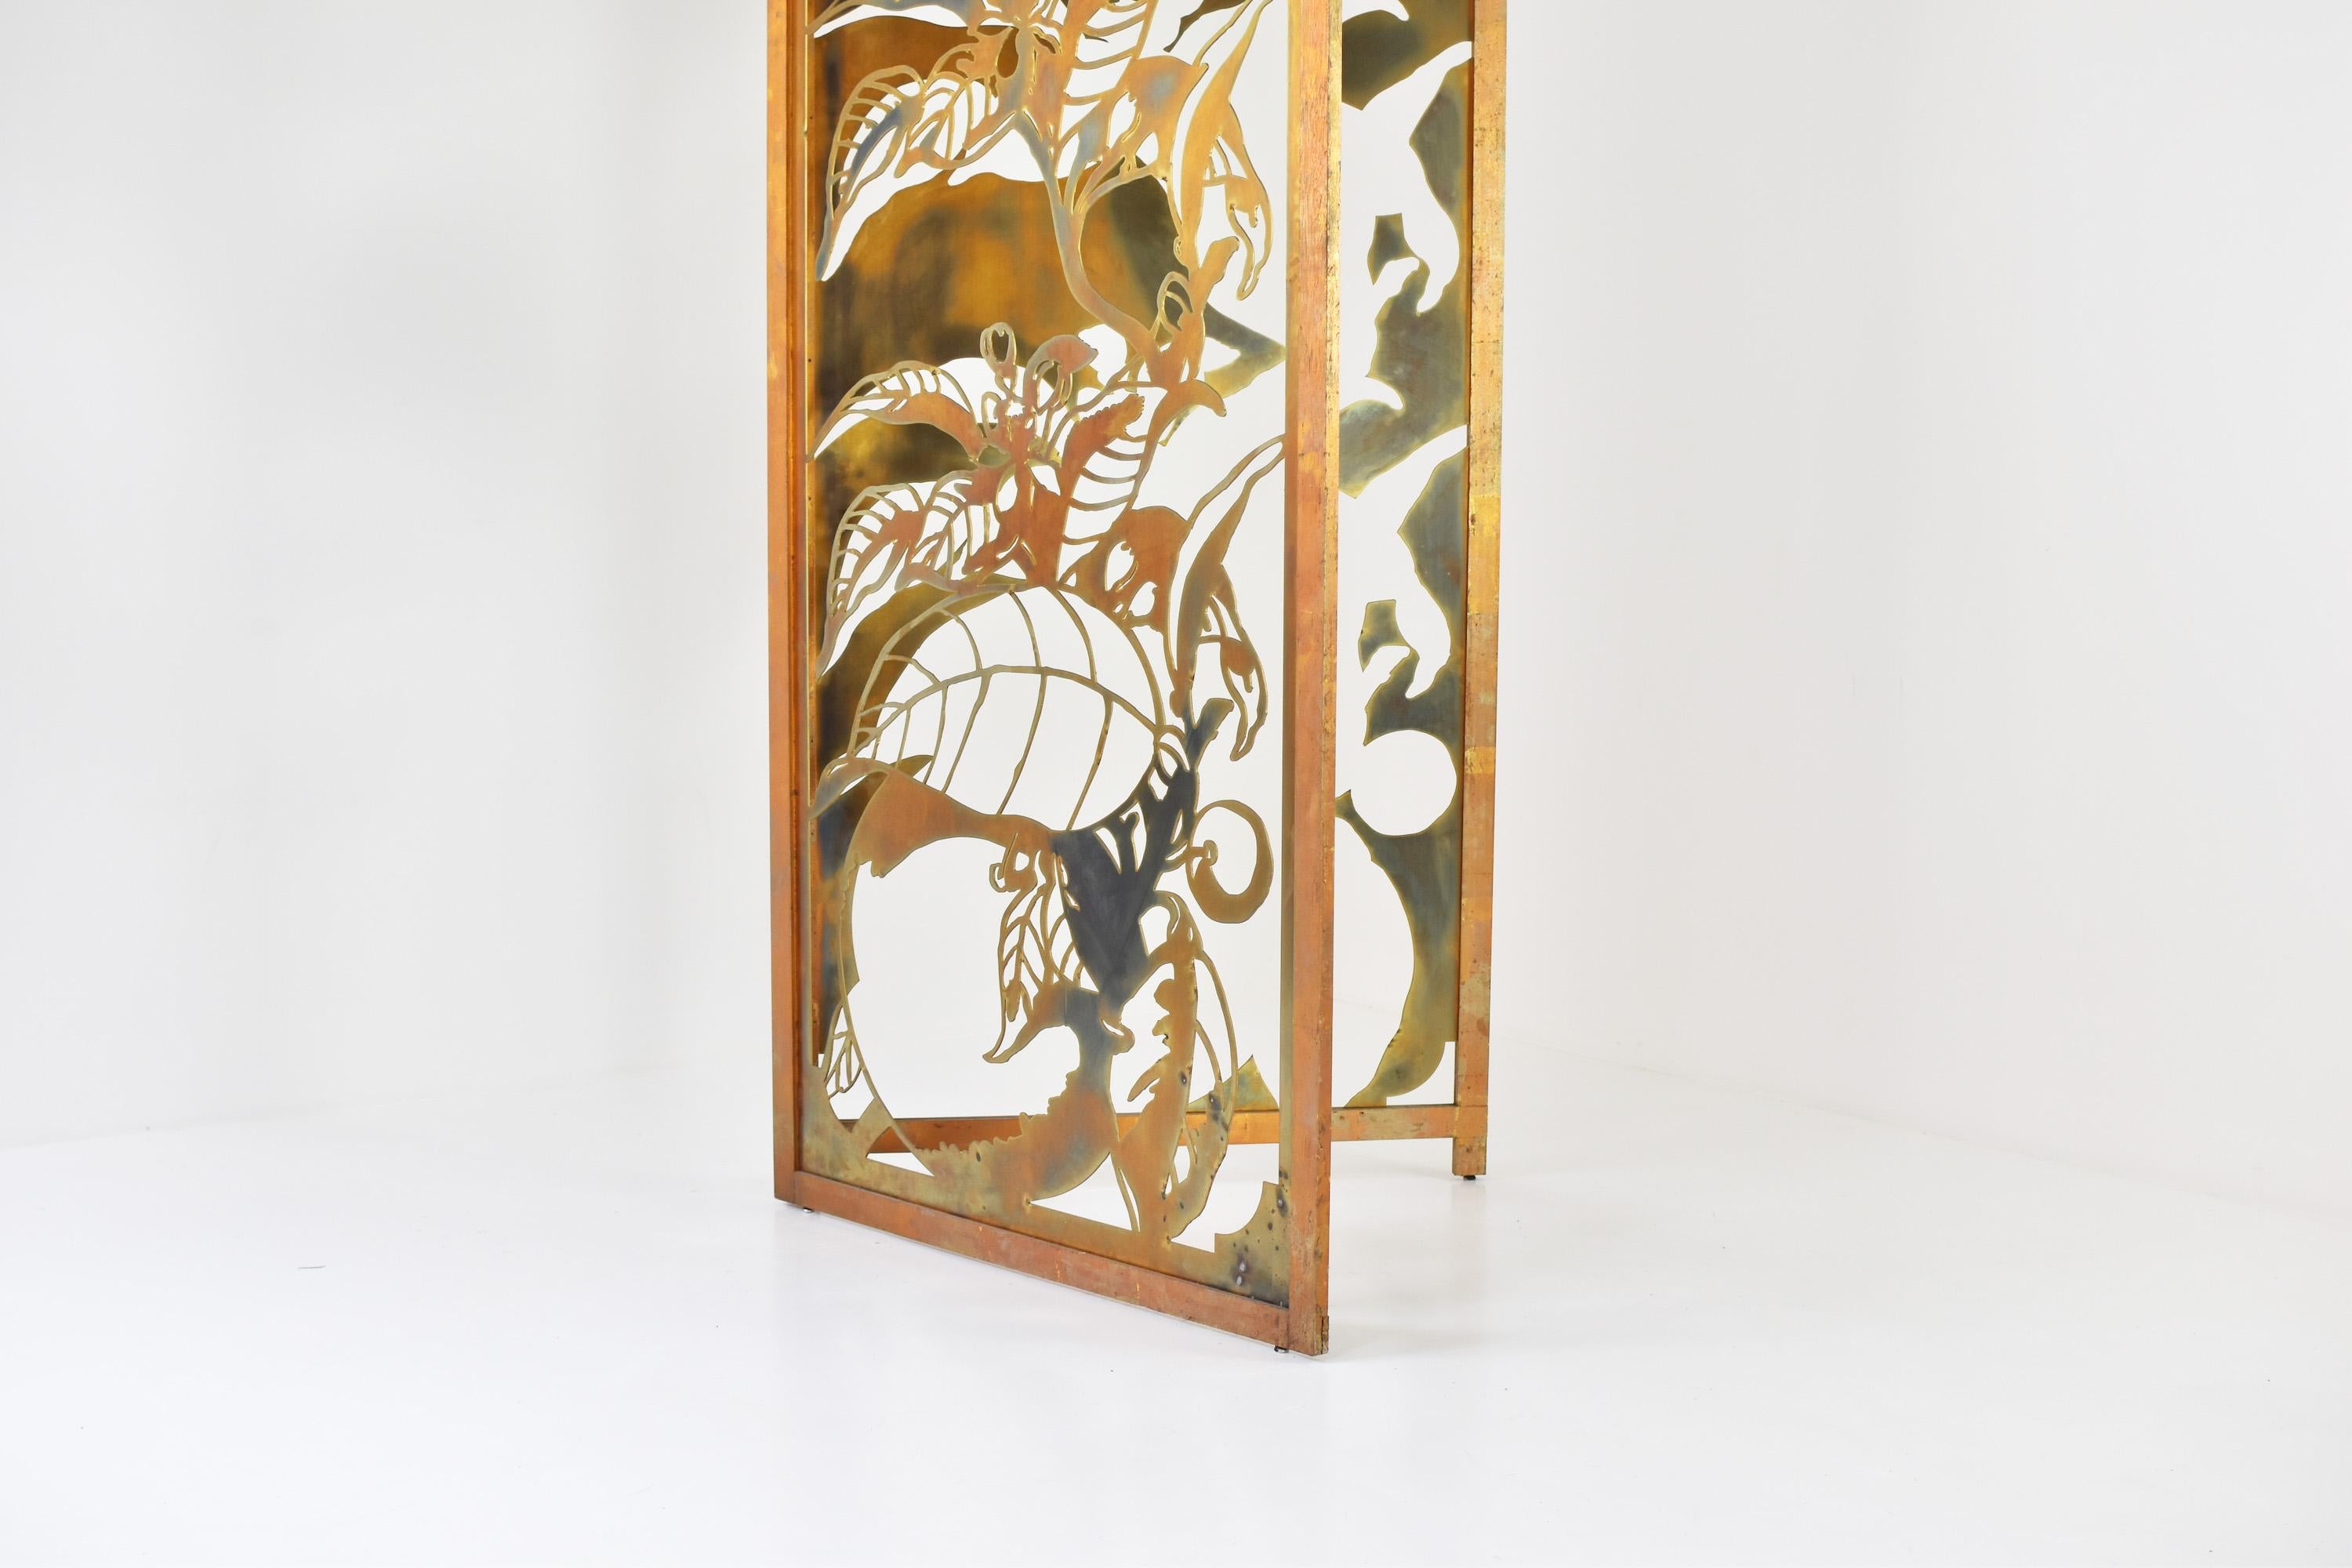 Exclusive decorative folding screen designed for Belgian fashion designer Dries Van Noten in the 1980's. A limited edition of 11 screens where made and exclusively here for sale. Each screen is custom made and unique shaped. Made out of laser-cut